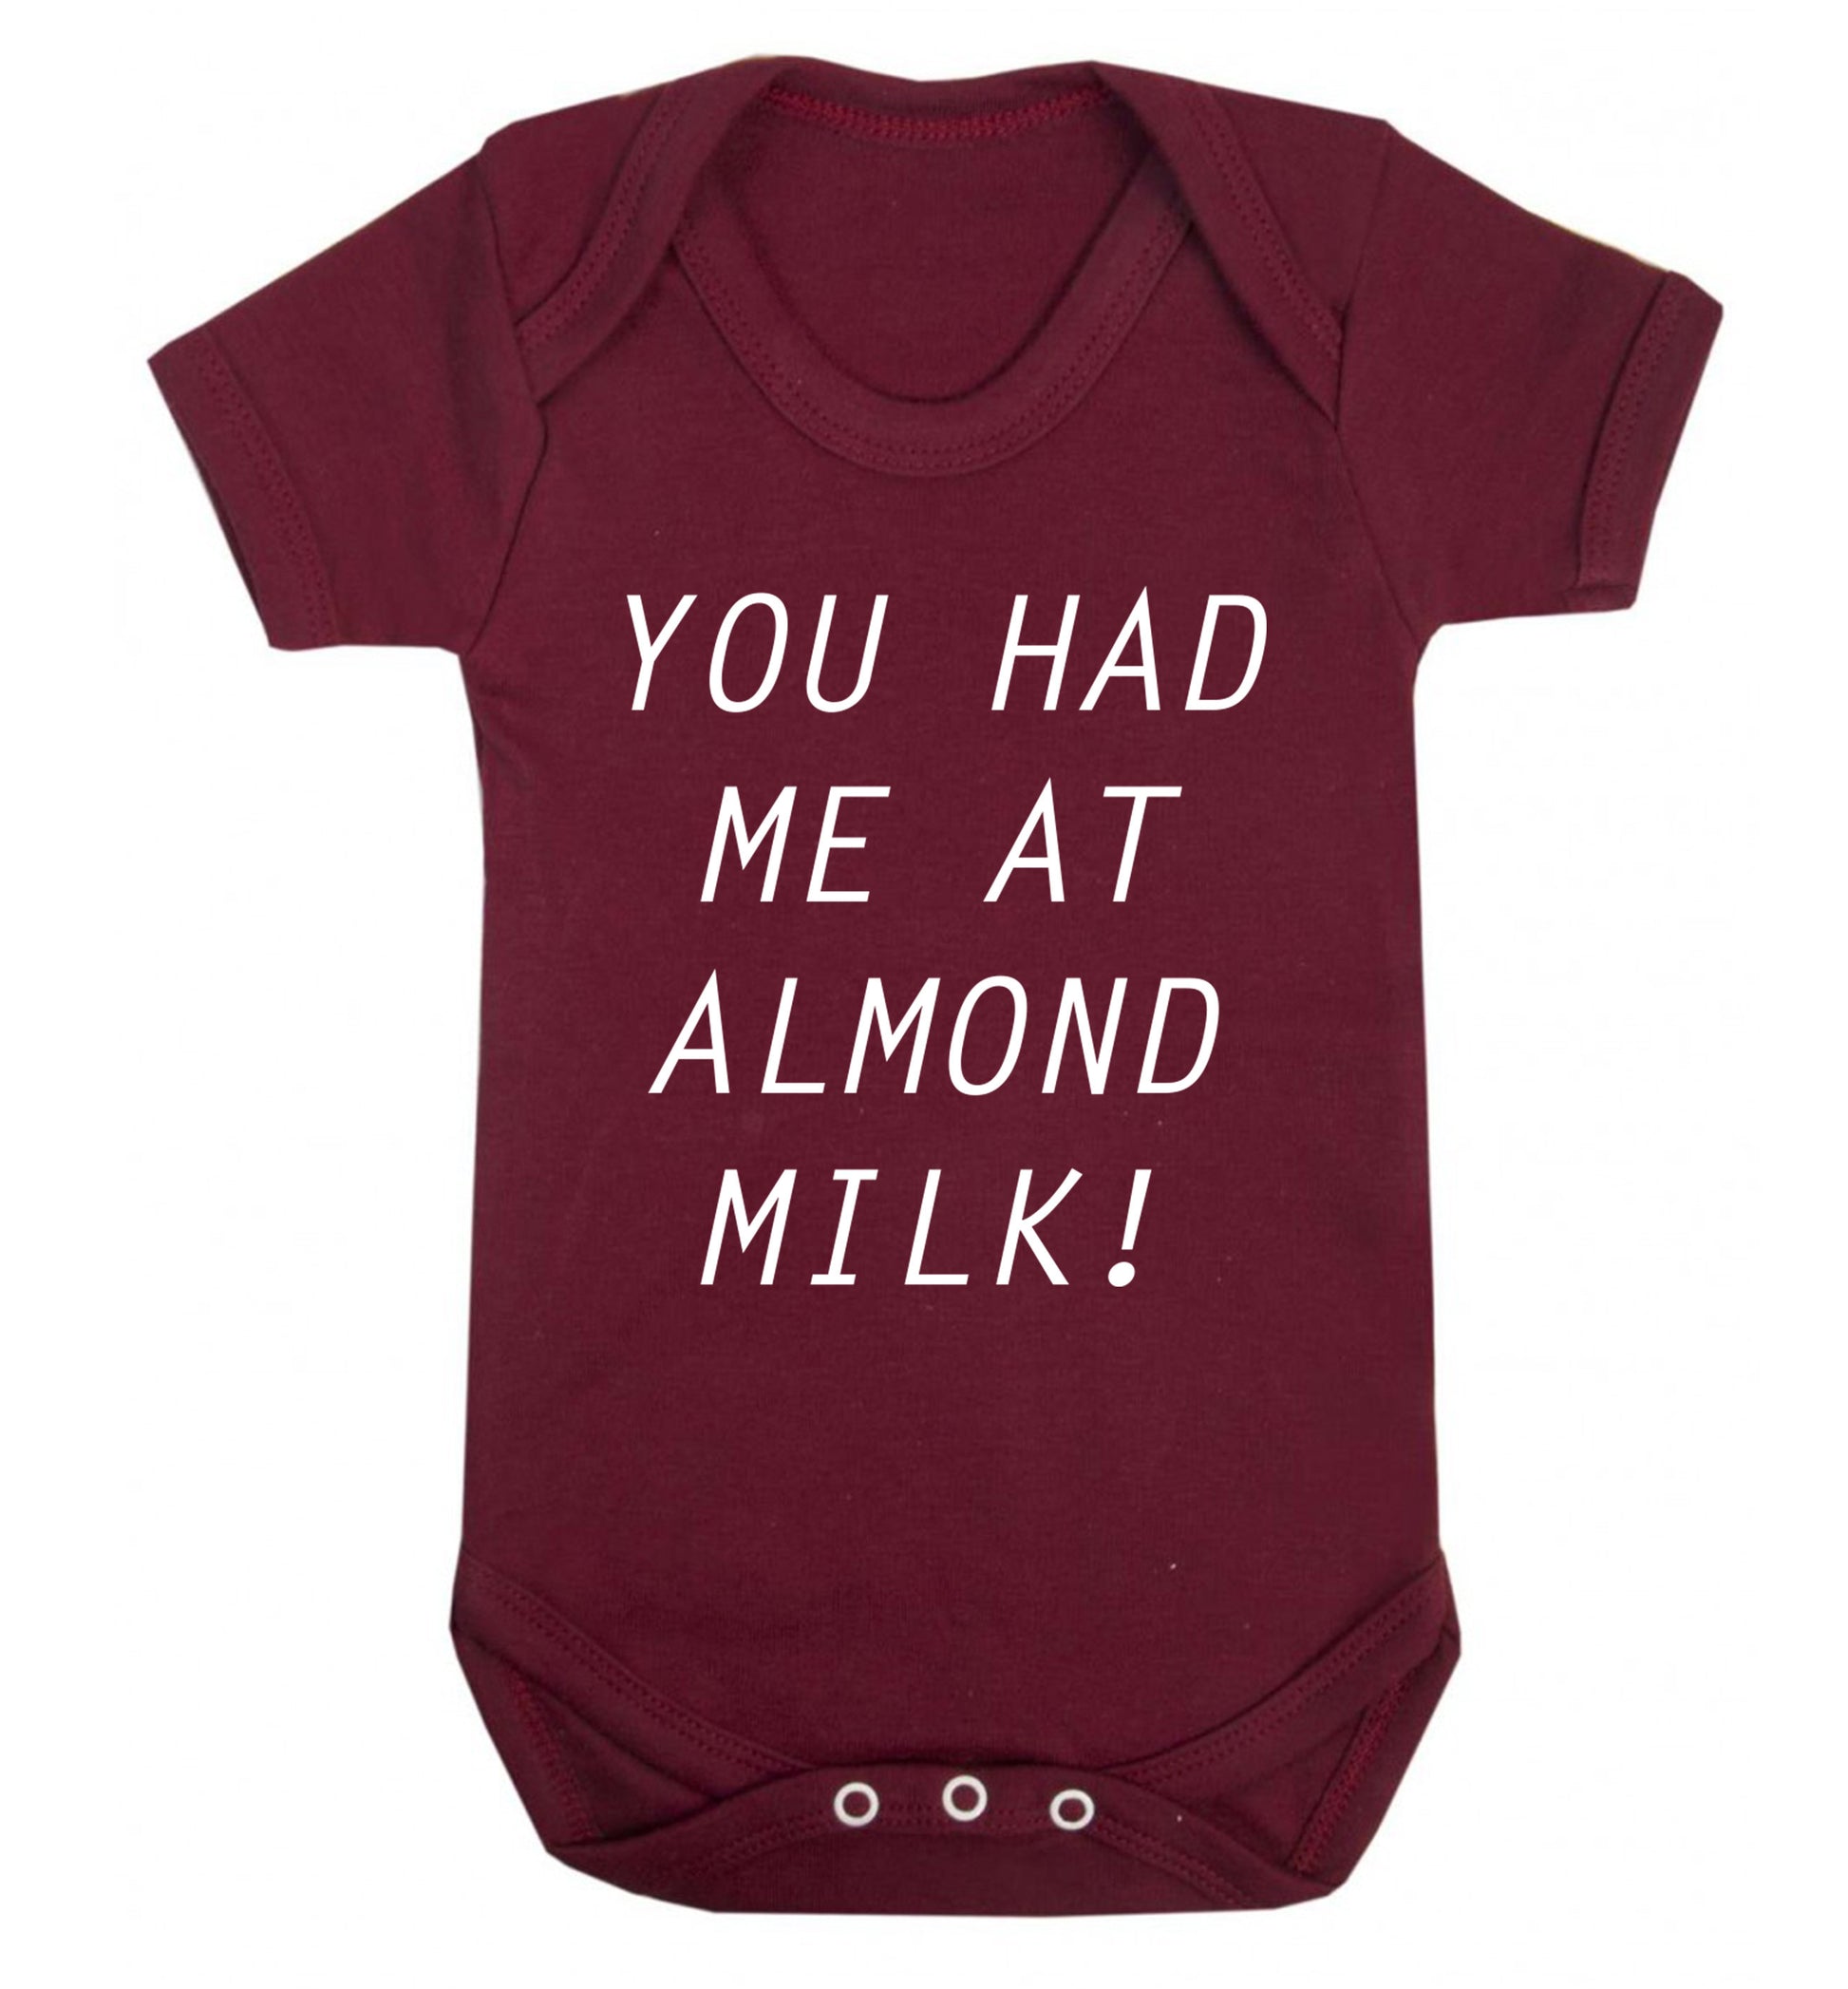 You had me at almond milk Baby Vest maroon 18-24 months